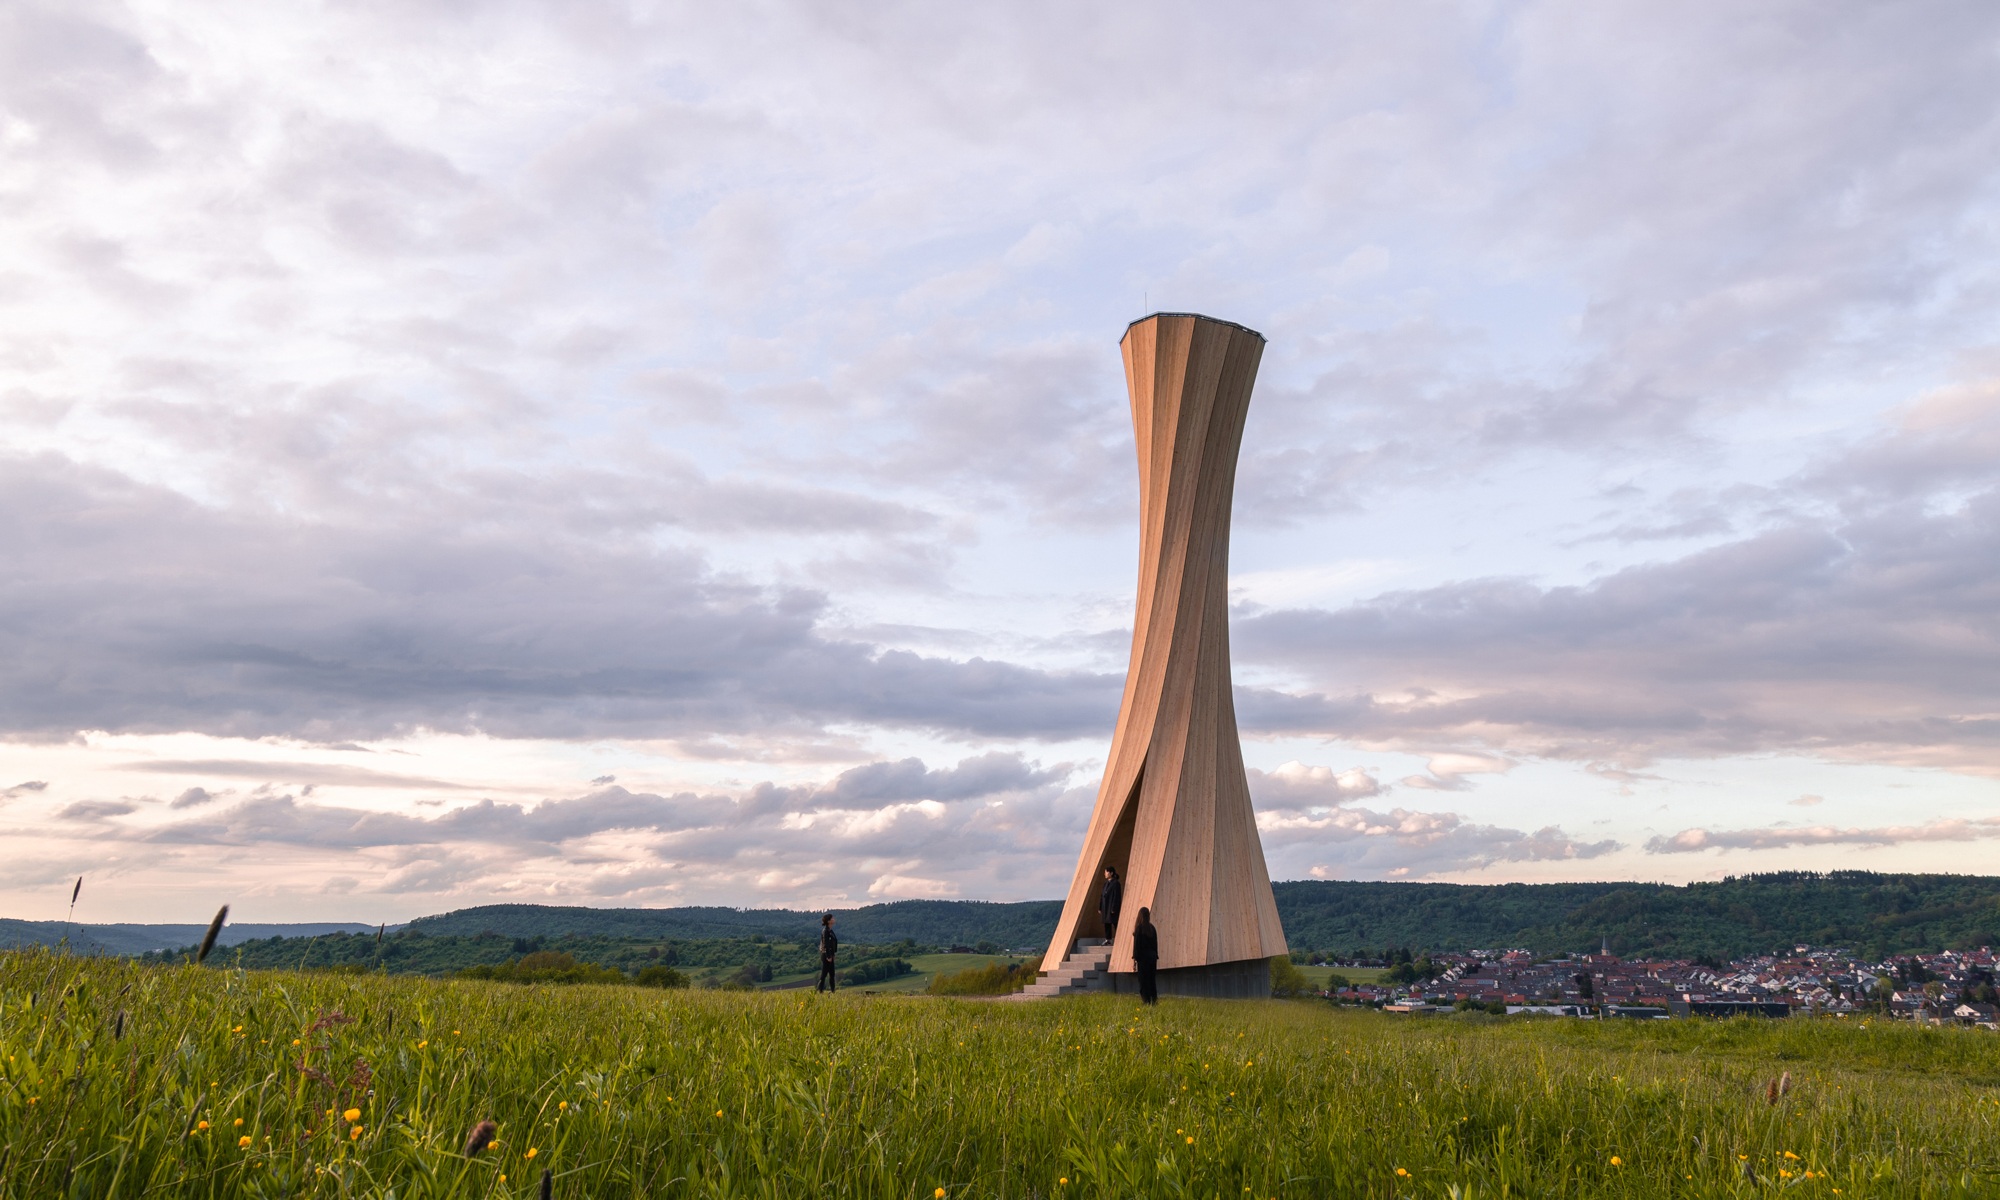 Overall view of the Urbach Tower at dawn. Some people viewing the tower and its specially formed wooden structure from the inside, enjoying the sweeping views across the house rooftops.